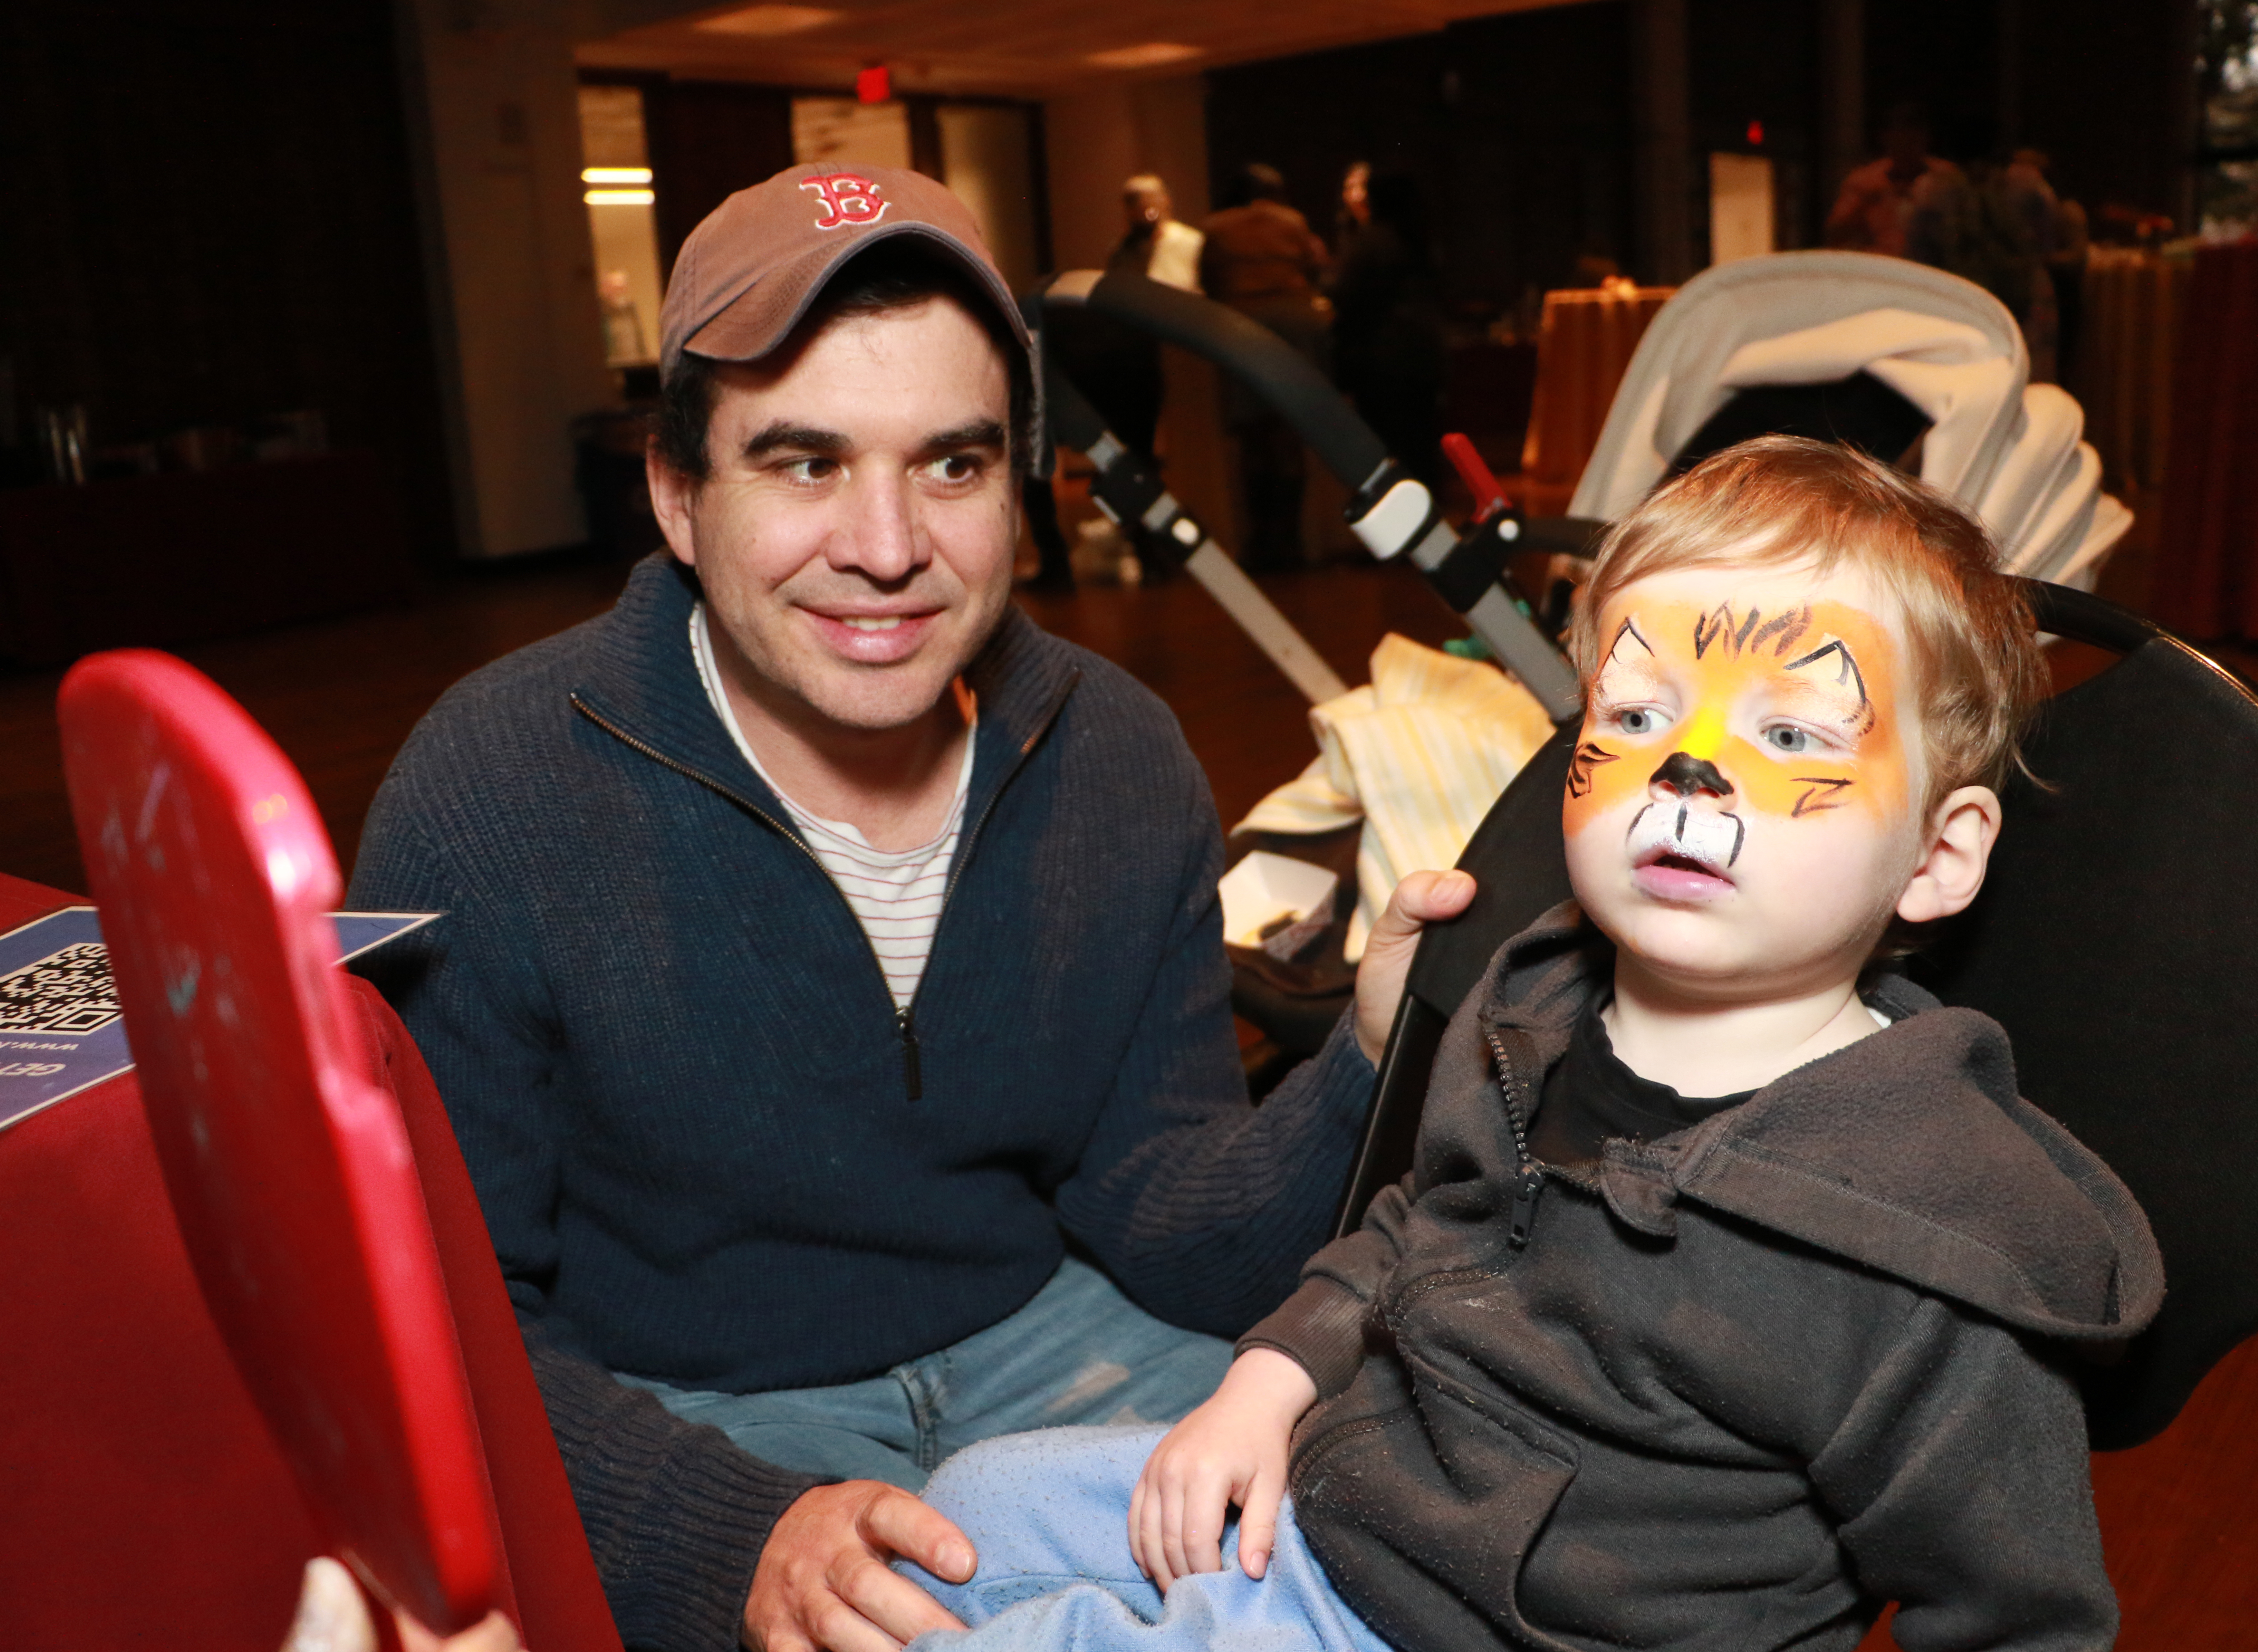 Parent in a baseball cap and grey fleece with a child having their face painted in a stroller